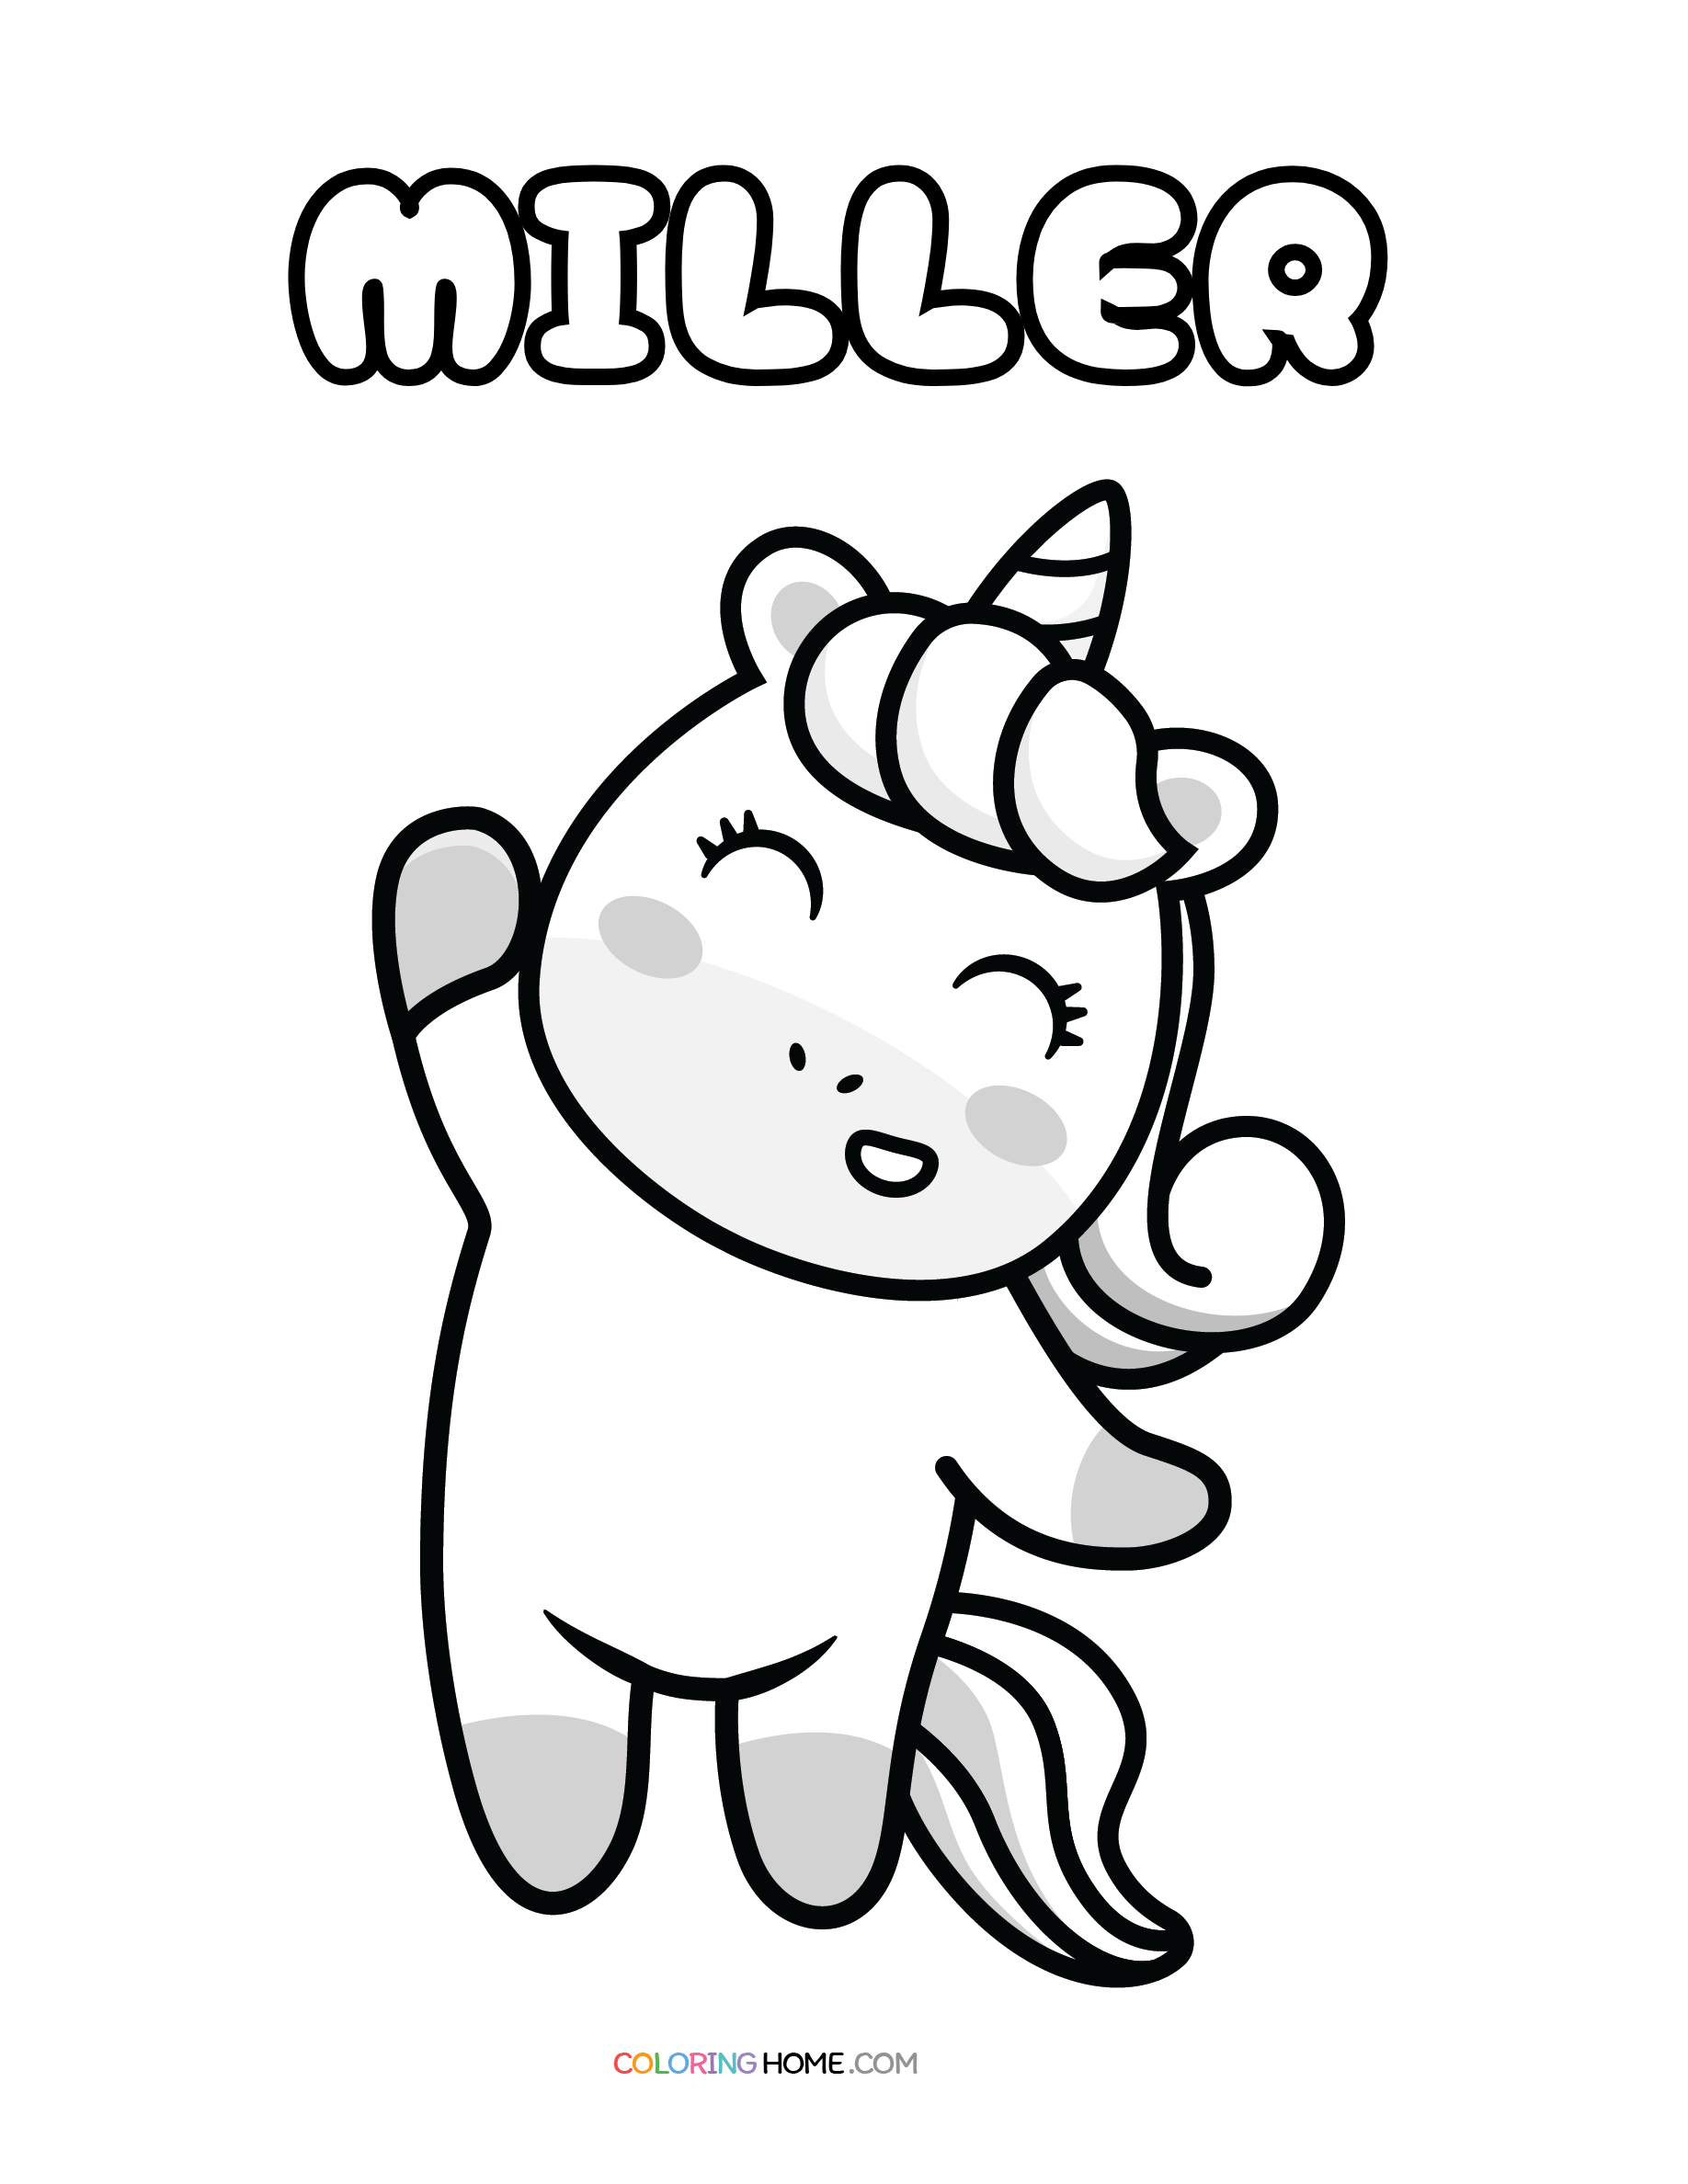 Miller unicorn coloring page